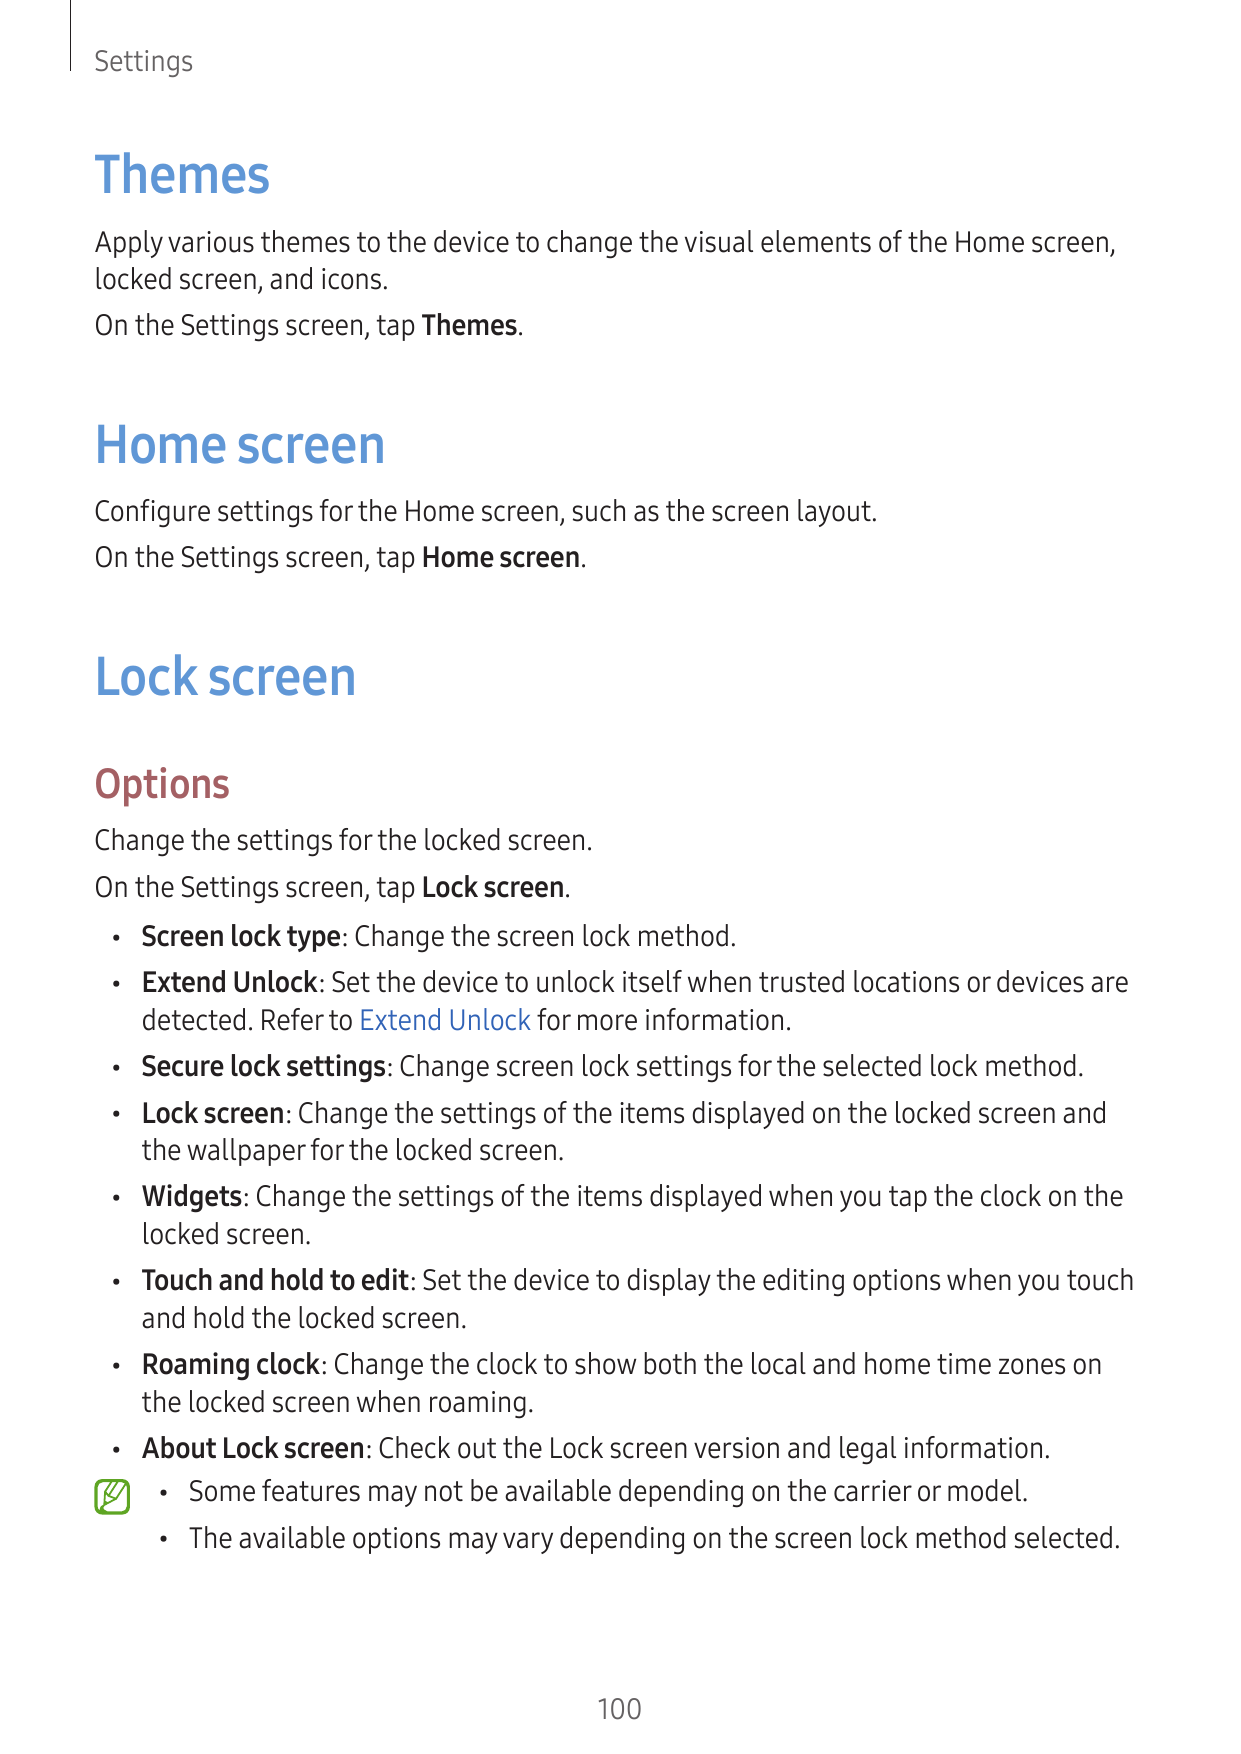 SettingsThemesApply various themes to the device to change the visual elements of the Home screen,locked screen, and icons.On th